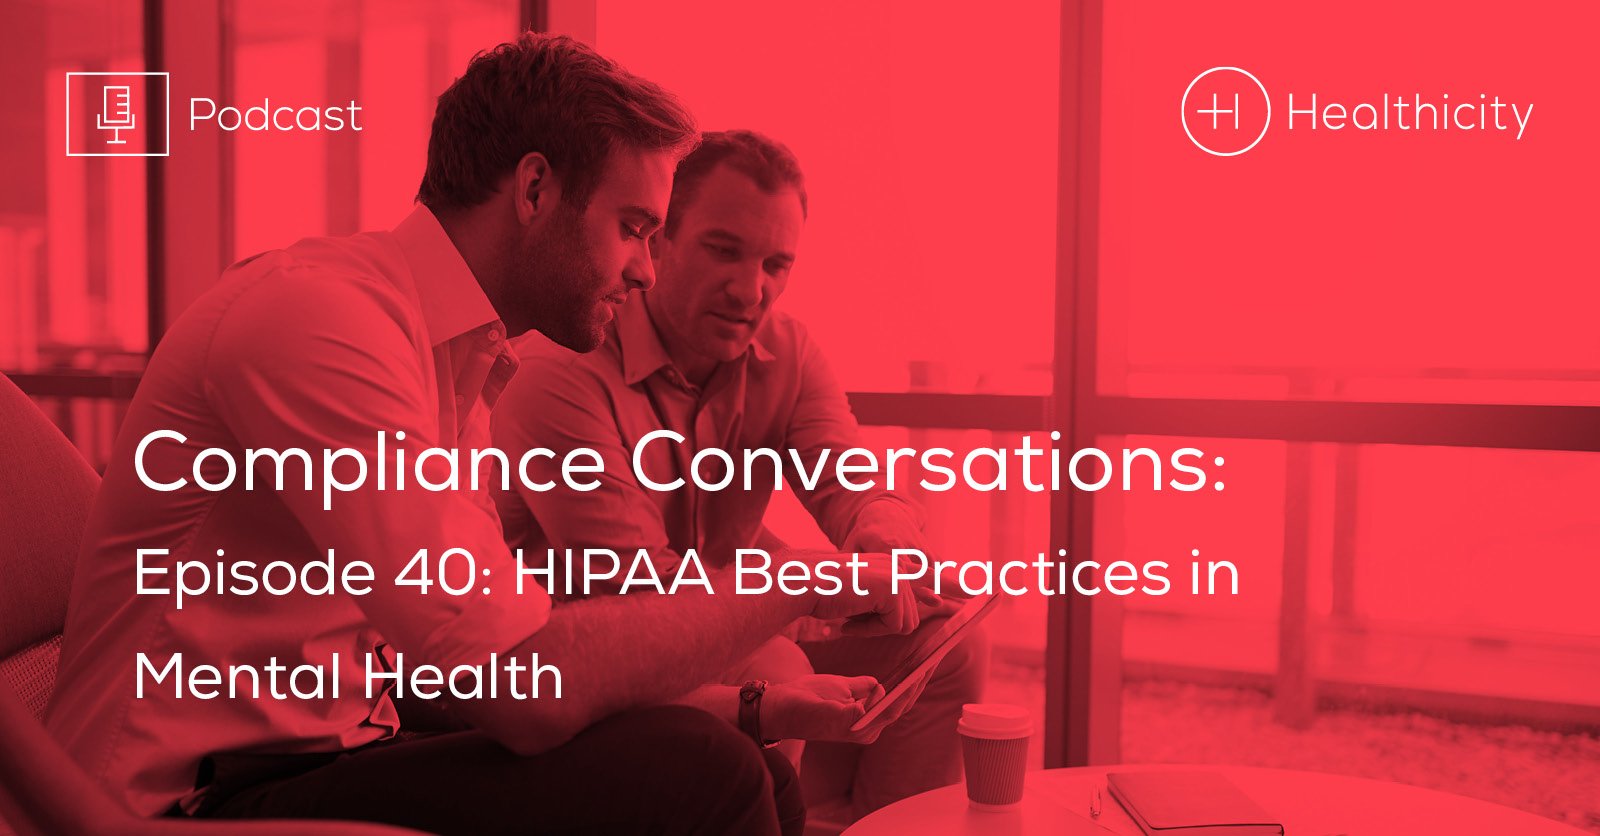 Listen to the Episode - The Gray Areas of HIPAA in Mental Health and Substance Abuse